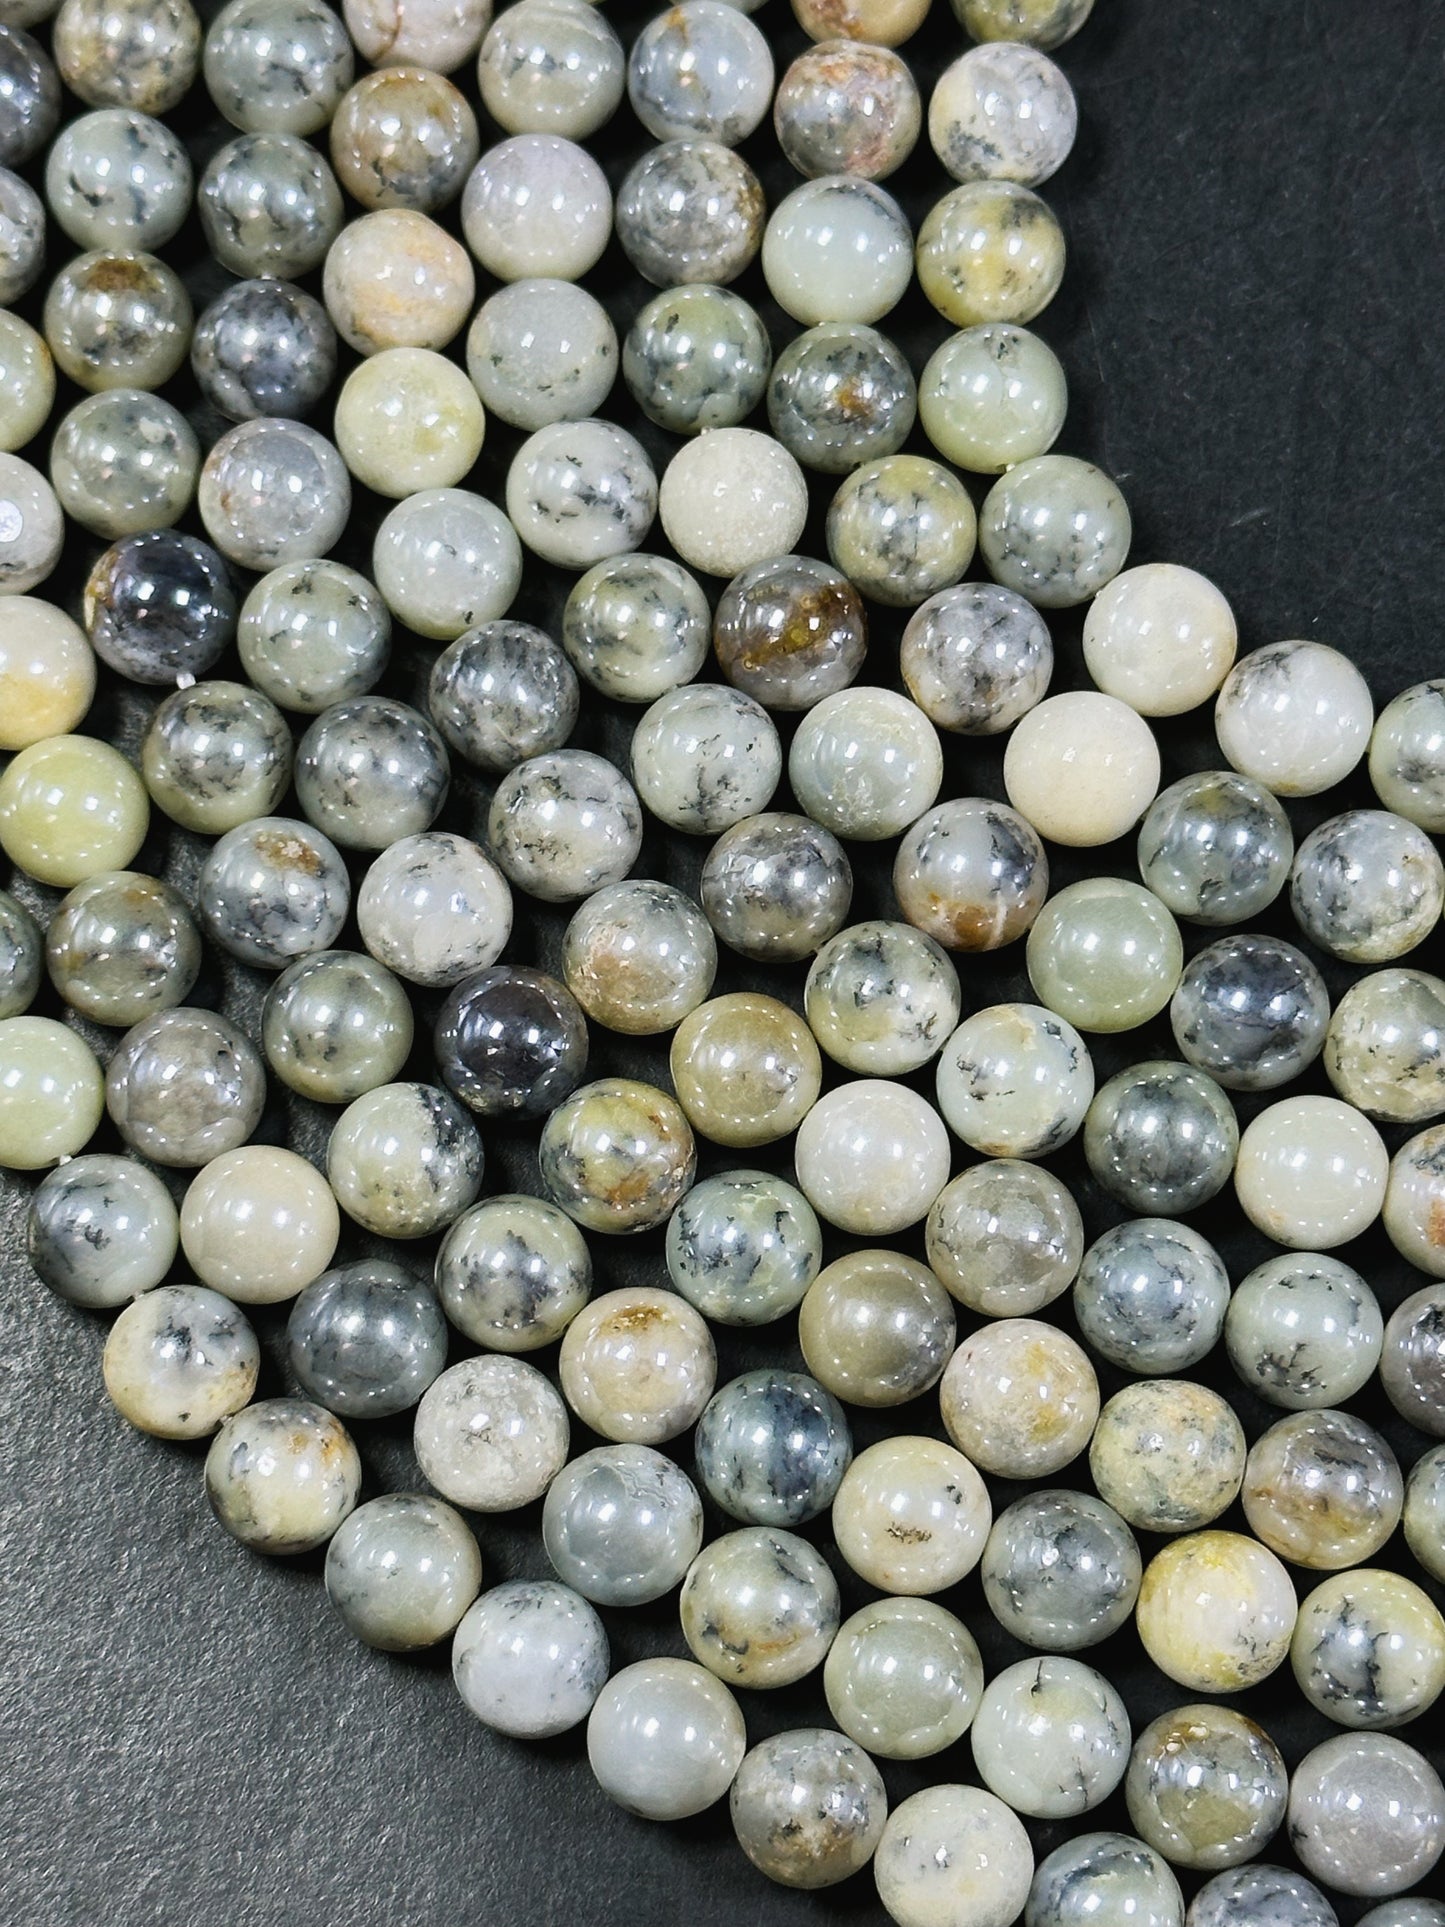 AAA Mystic Natural Opal Gemstone Bead 8mm 10mm 12mm Round Bead, Beautiful Mystic Coated White Gray Color Opal Gemstone Bead, Great Quality 15.5"